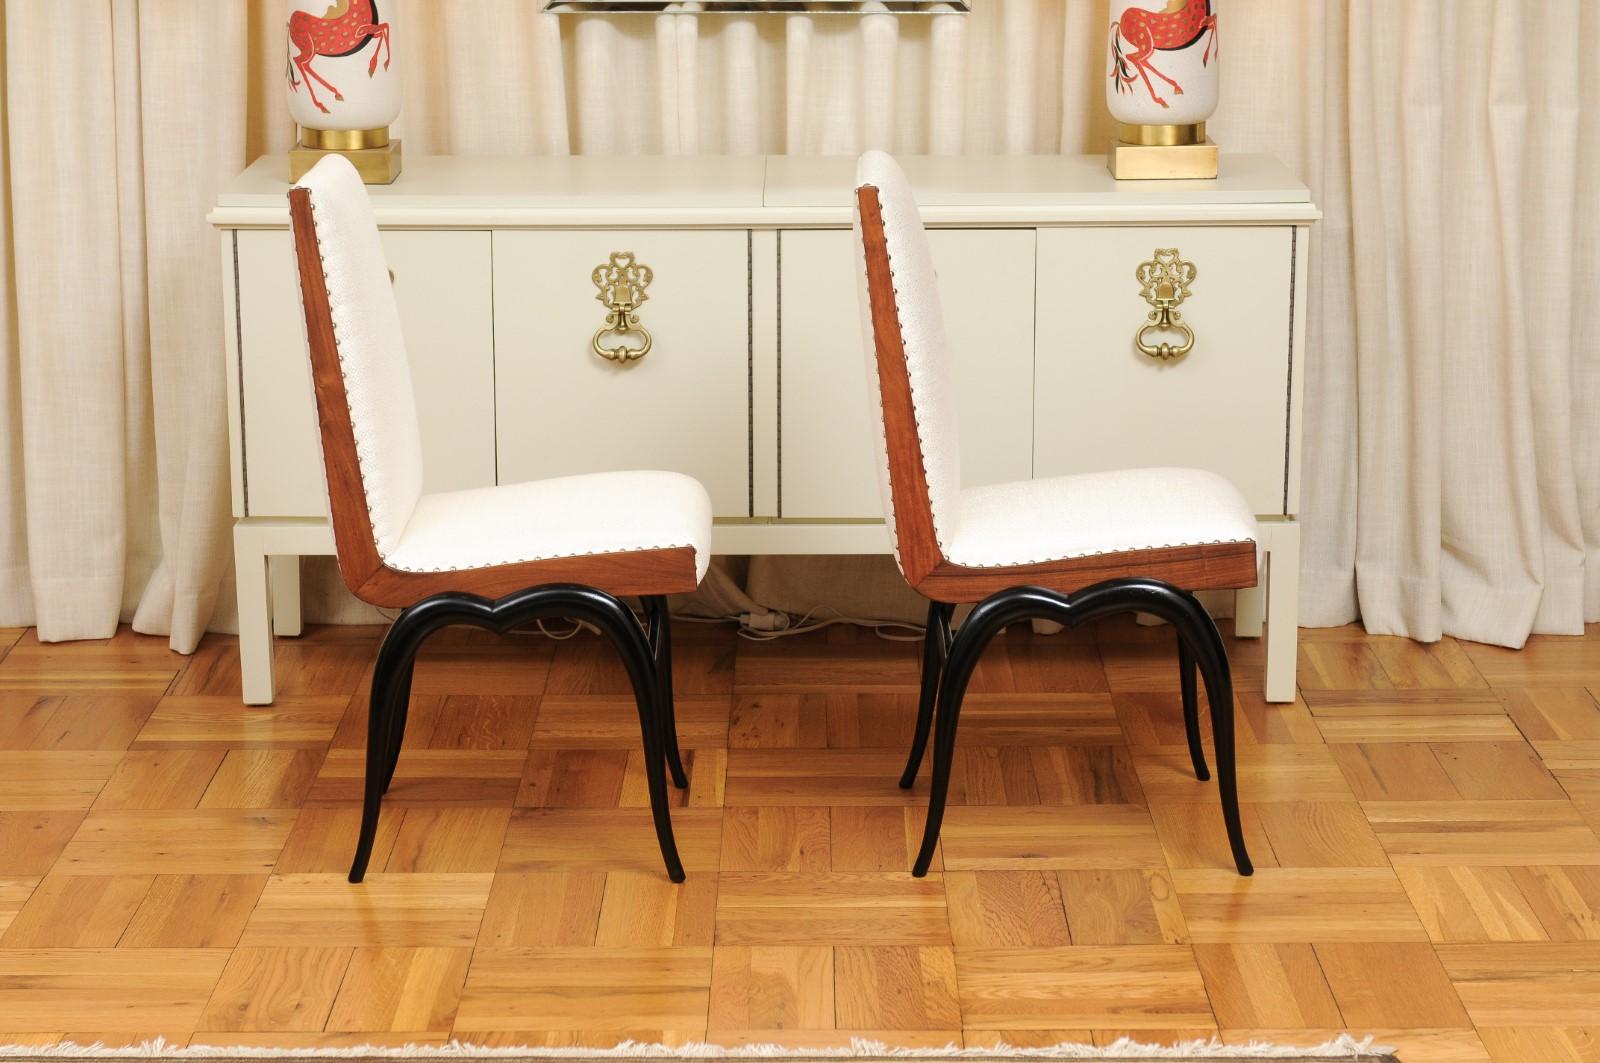 Breathtaking Set of 16 Walnut and Mahogany Dining Chairs, Brazil, circa 1955 For Sale 3